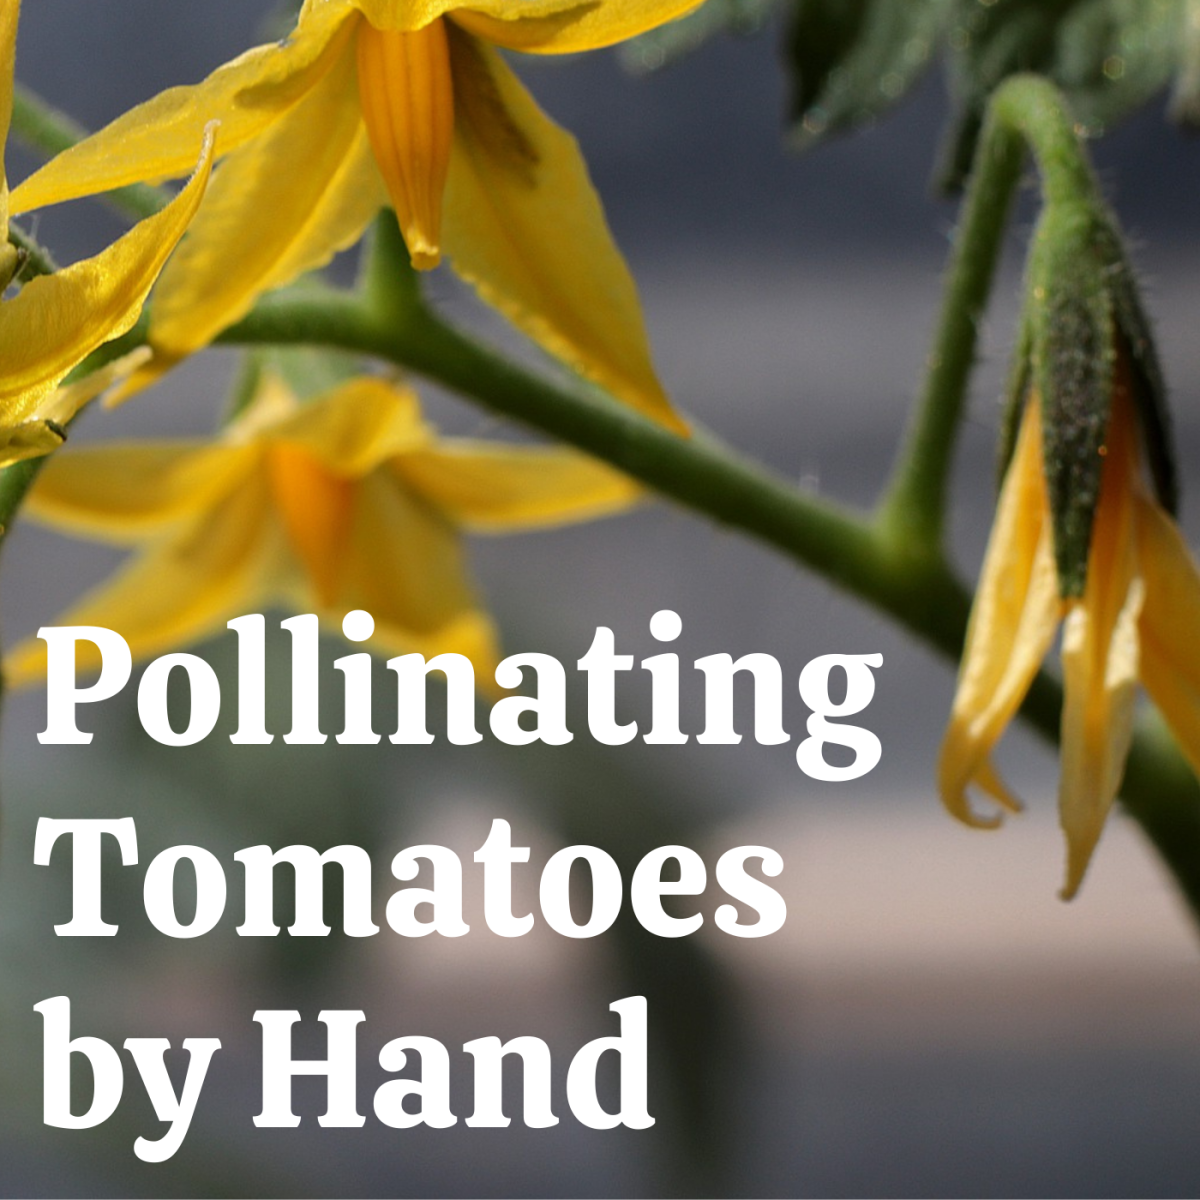 How to Hand-Pollinate Tomato Plants With a Toothbrush